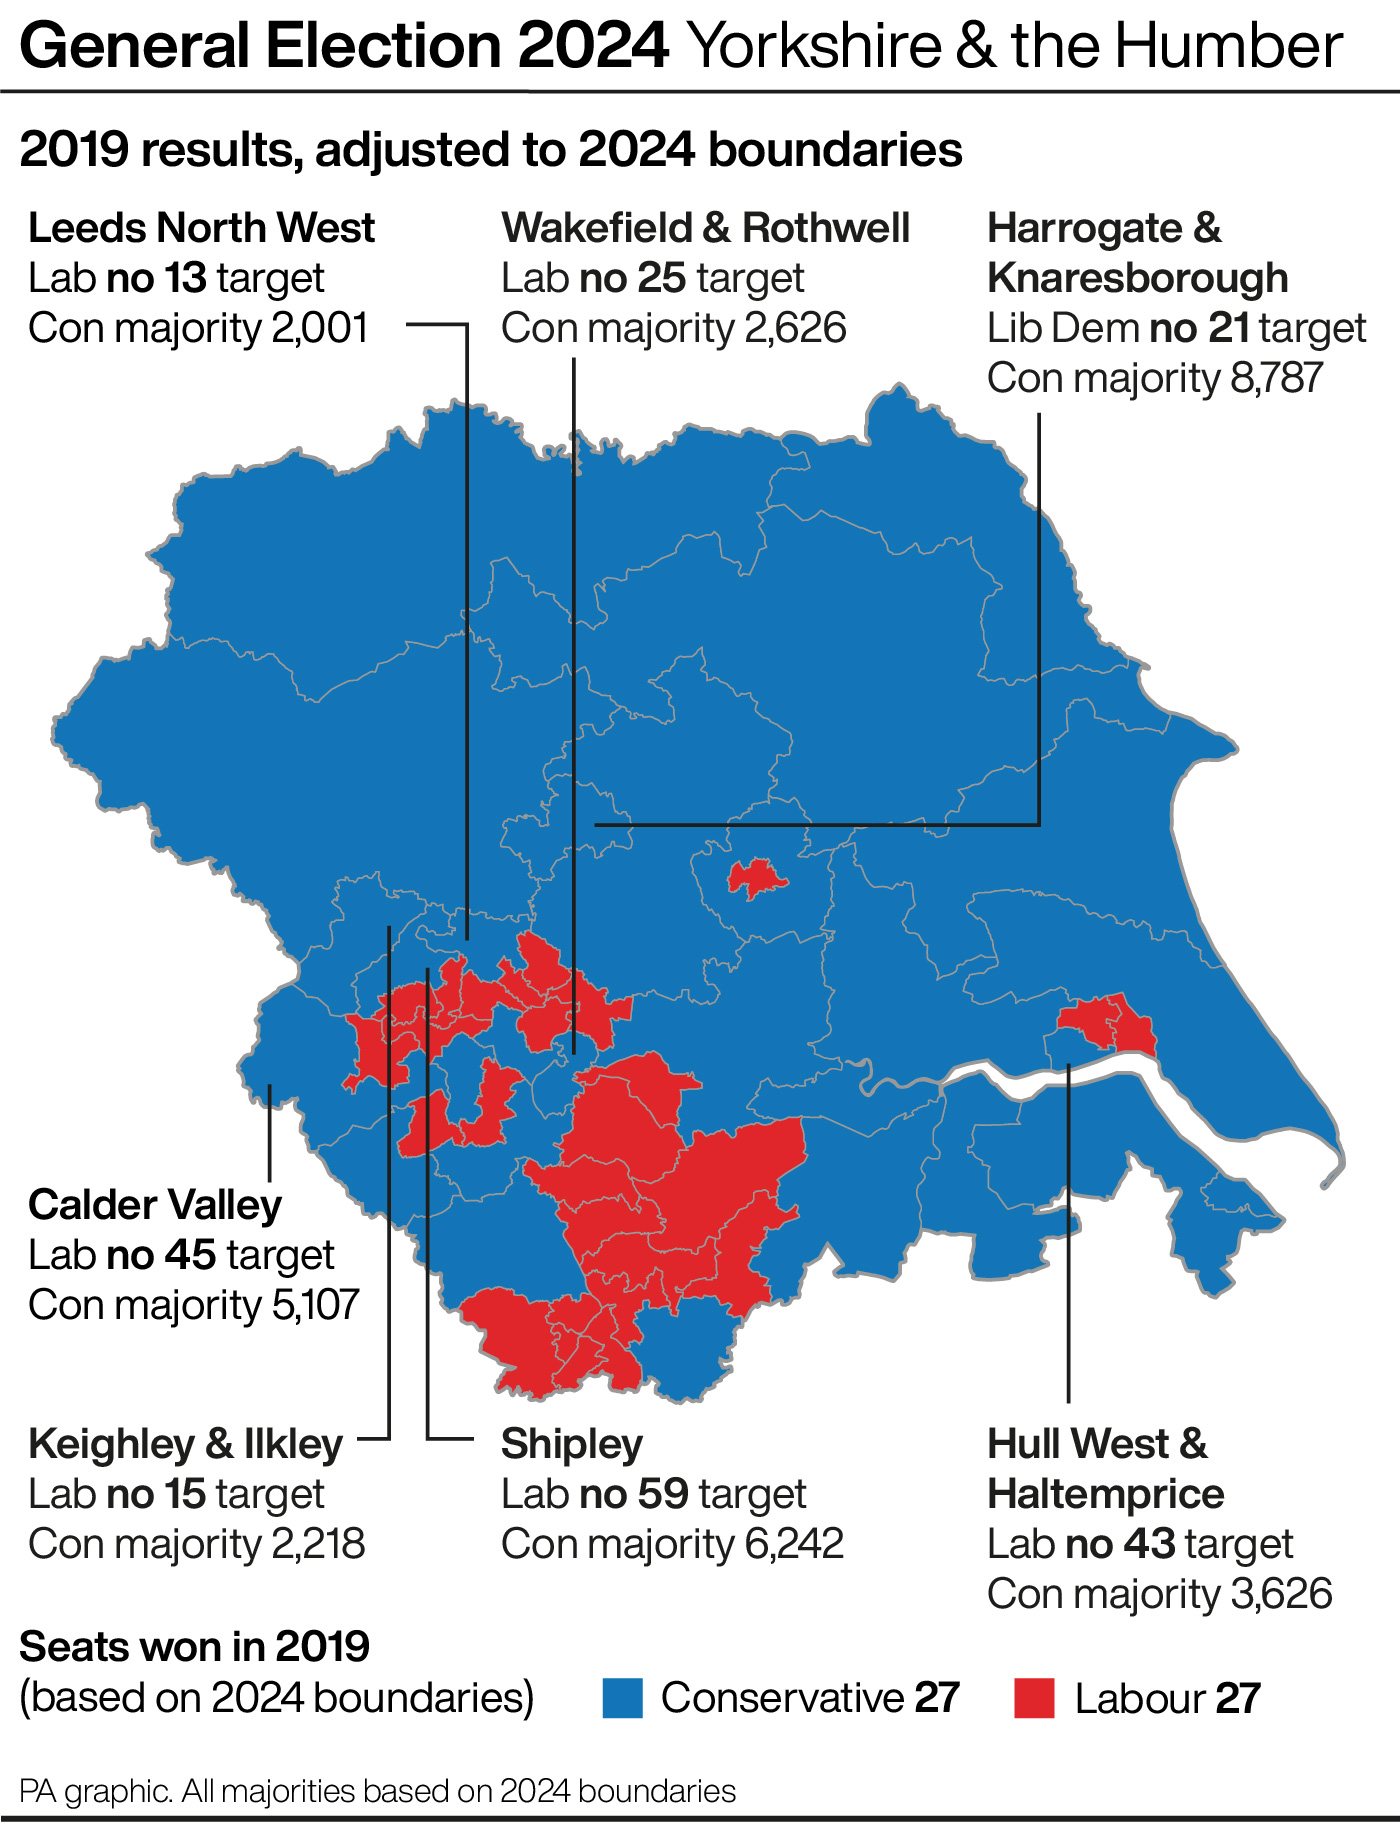 A map showing key battleground seats in Yorkshire & the Humber